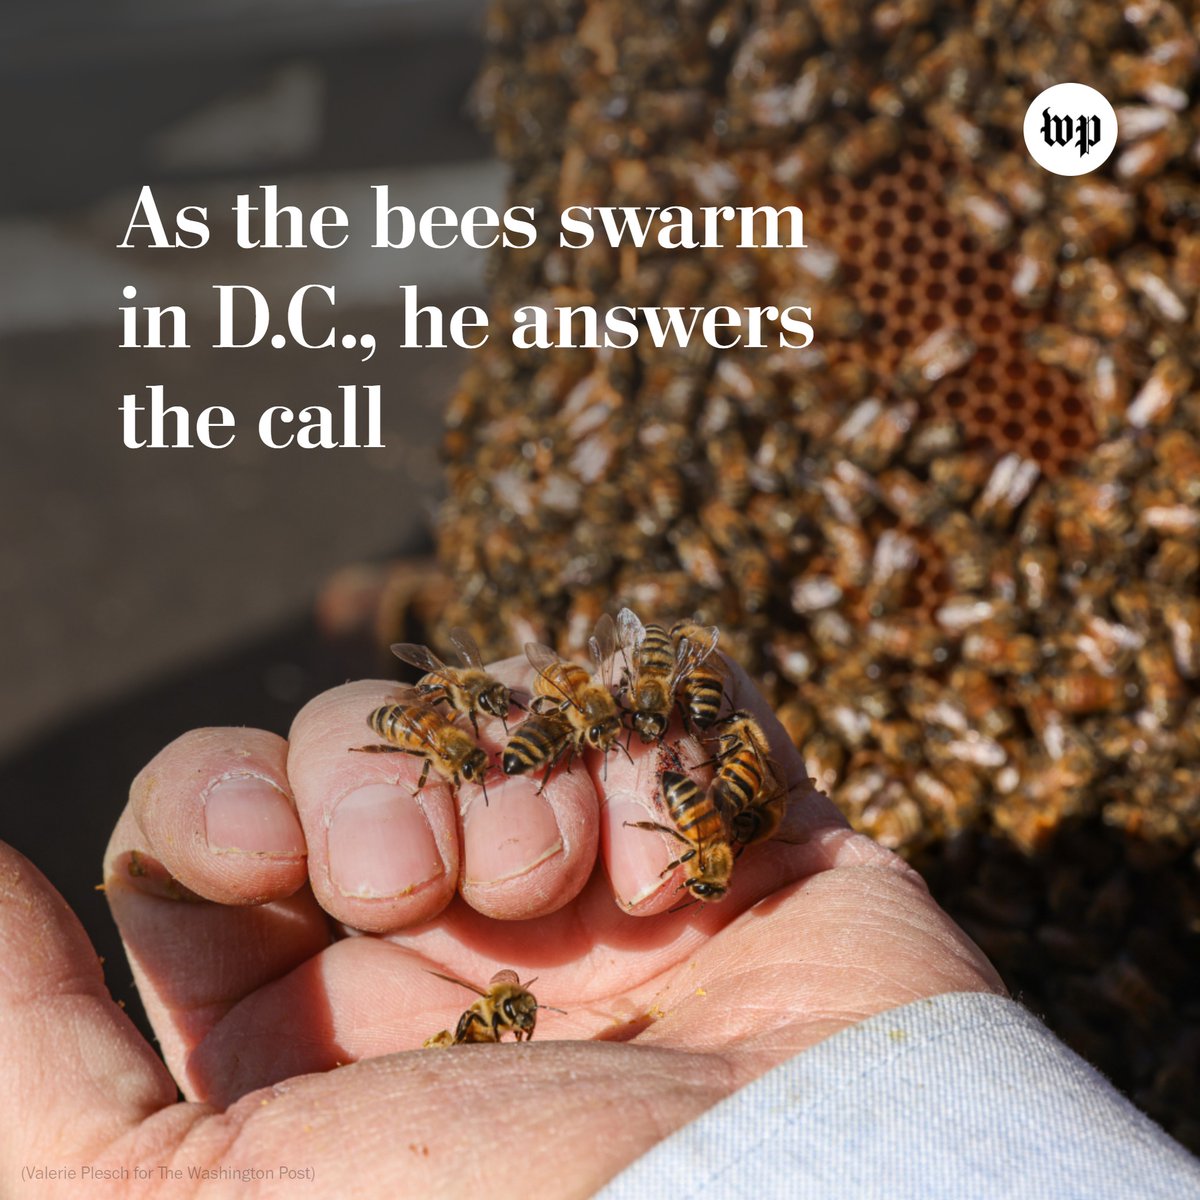 Every year in D.C., bees swarm trees, buildings, parked cars — anything that they can land on — eliciting curses and screams from terrified people. That’s when folks like Delwyn Voss, a member of the D.C. Beekeepers Alliance, get calls for help. wapo.st/4a1VI1Z